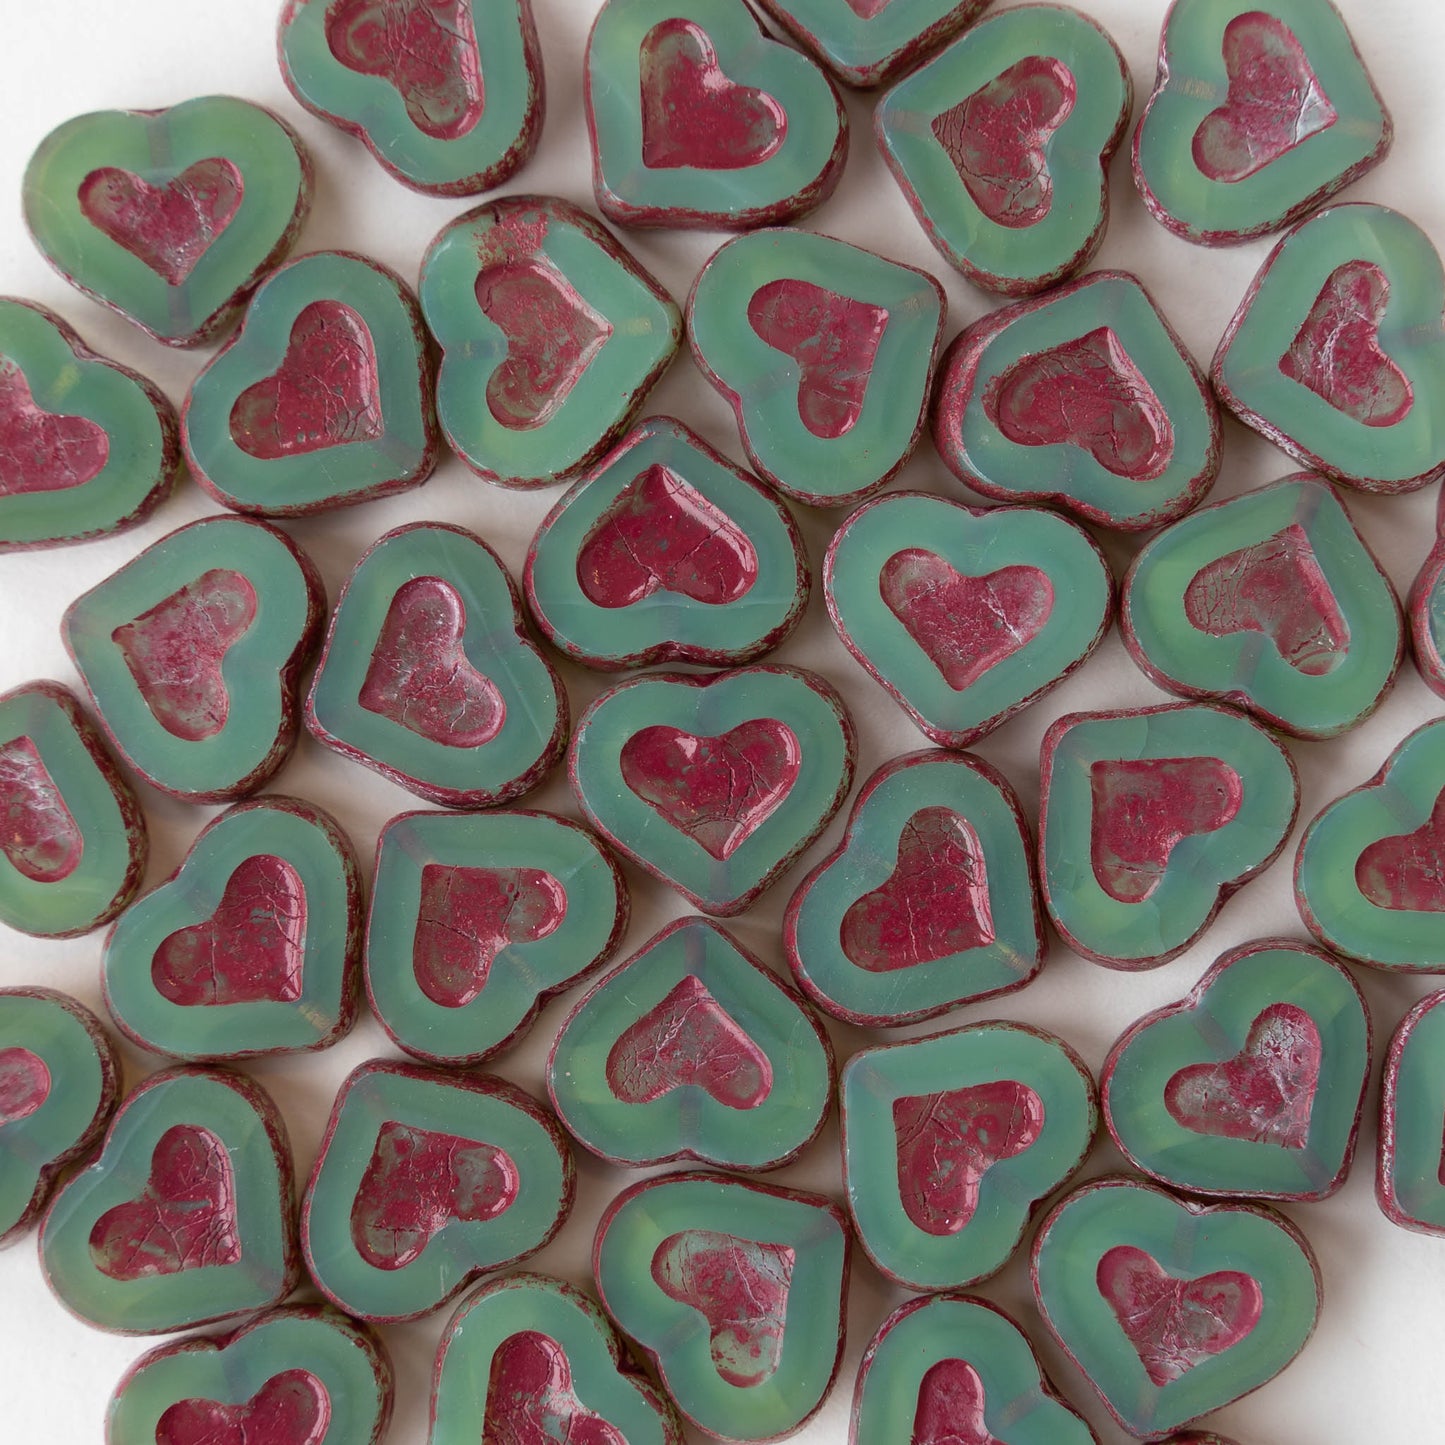 14mm Heart Beads - Opaline Green with Pink Wash - 10 hearts